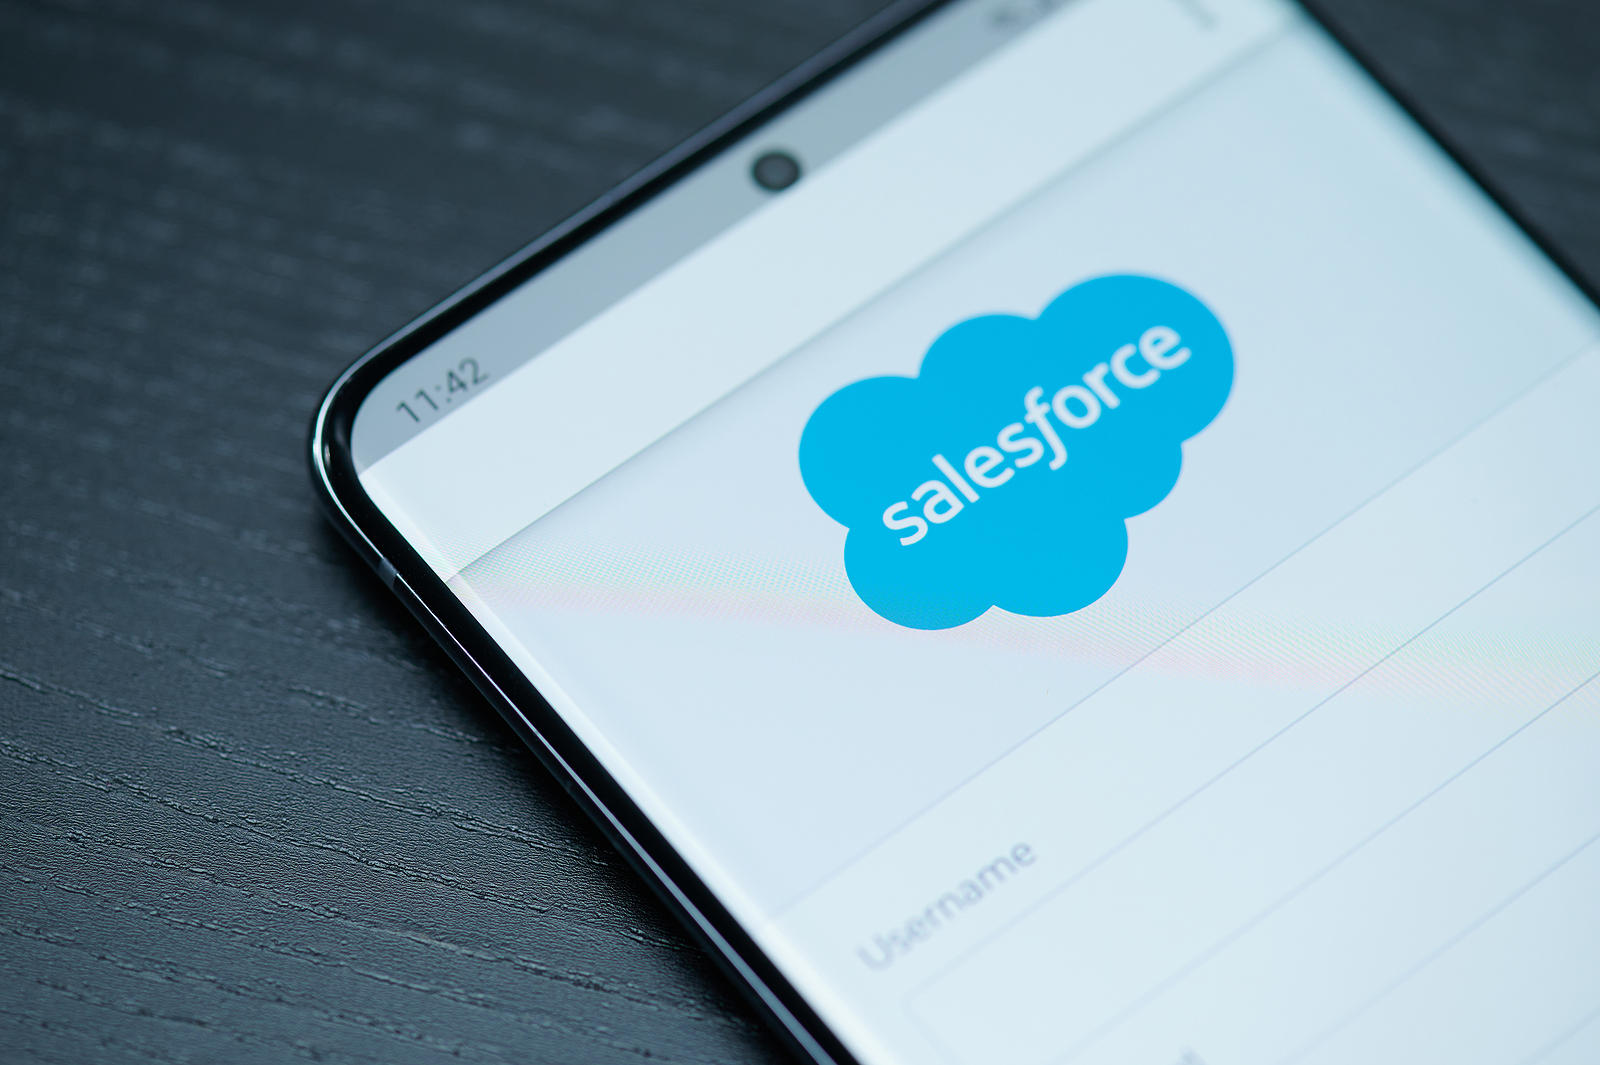 Salesforce Email Service Zero-Day Exploited in Phishing Campaign – Source: www.securityweek.com